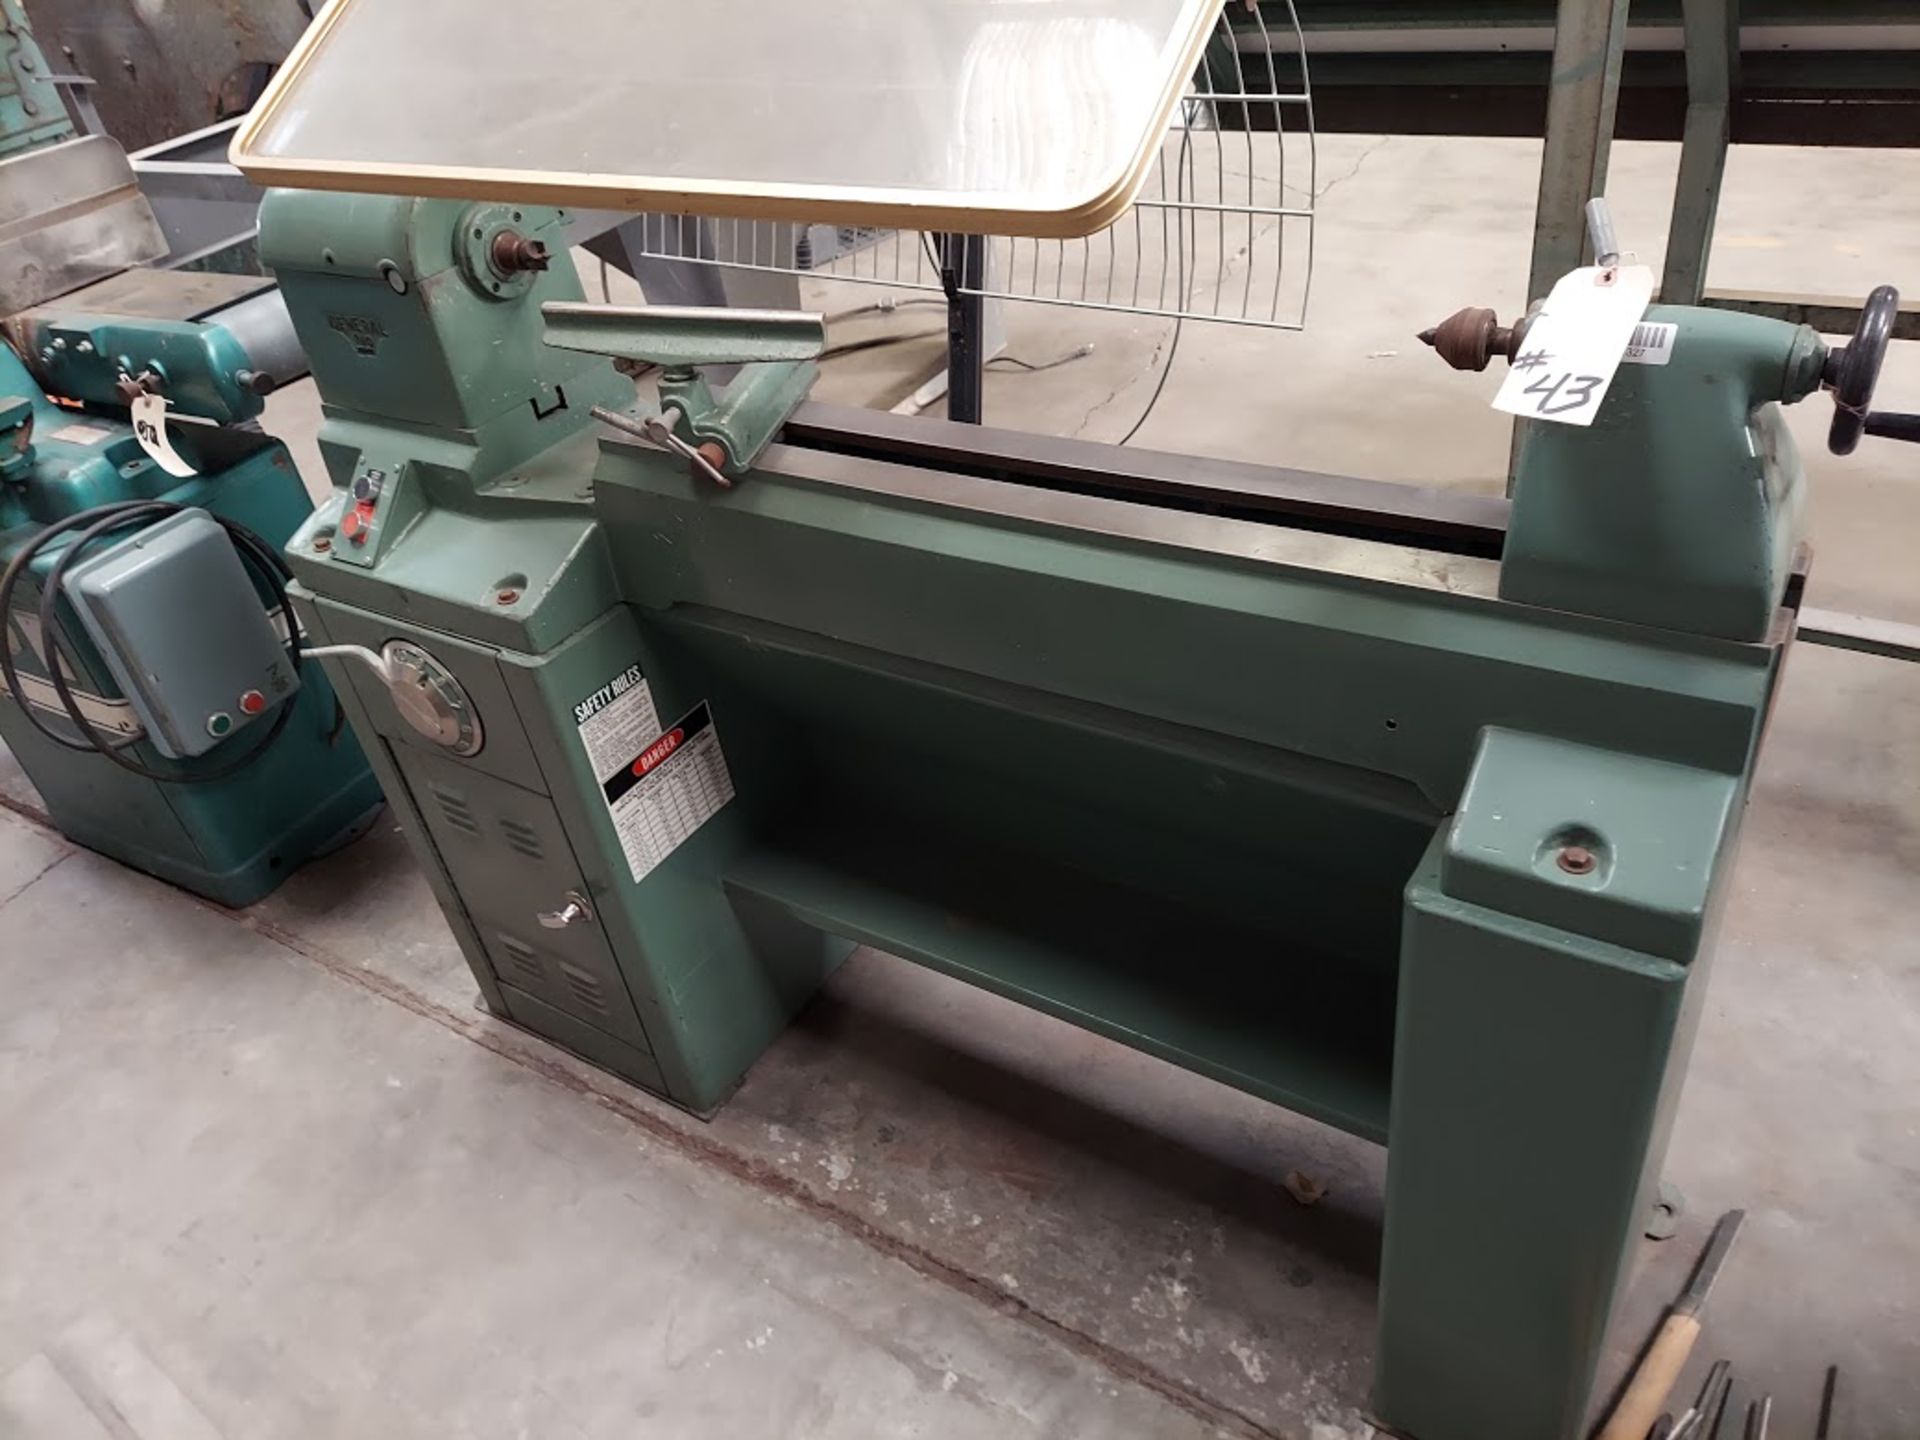 General Model #260 12" x 36" Wood Lathe, Varible Speed Hand Control, Lesson 1.5 HP 230/460 Volts